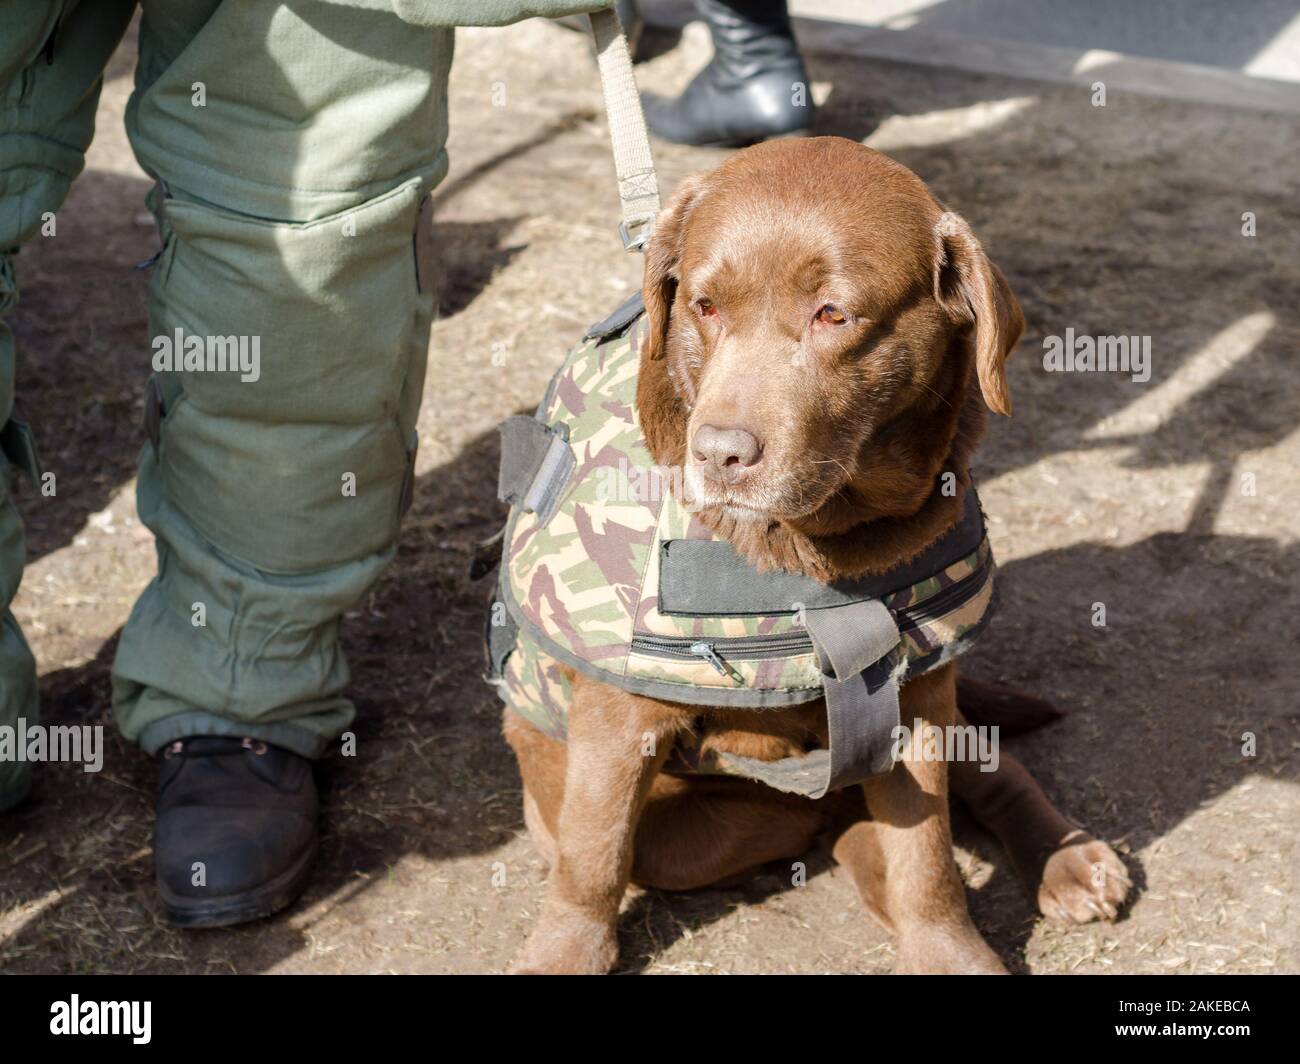 Military dog for demining of bombs in a uniform. Stock Photo